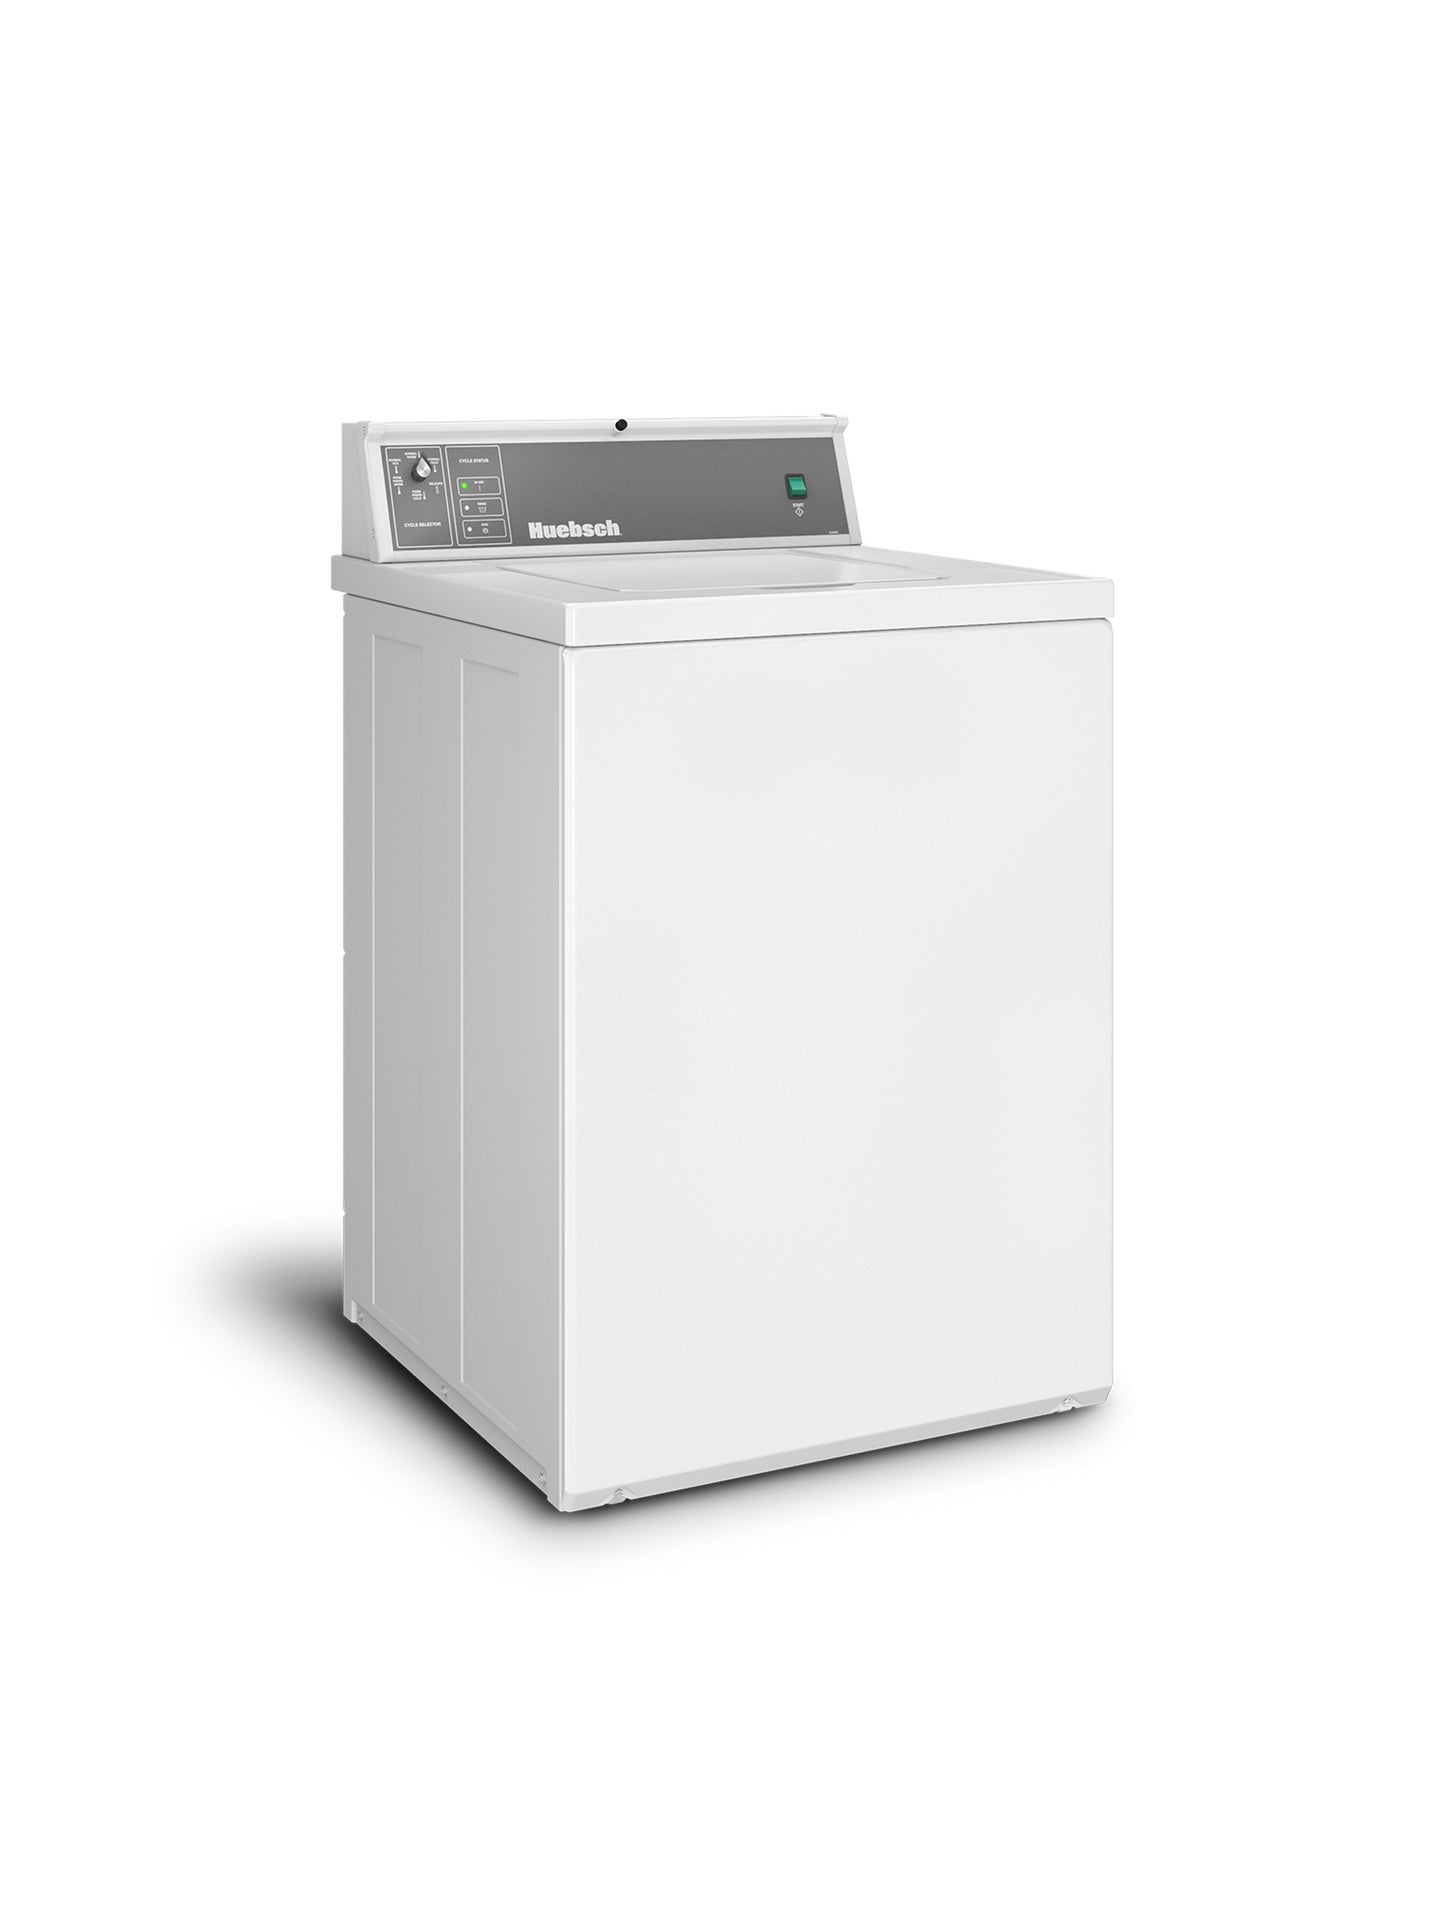 ON-PREMISE TOP LOAD WASHER - PUSH TO START